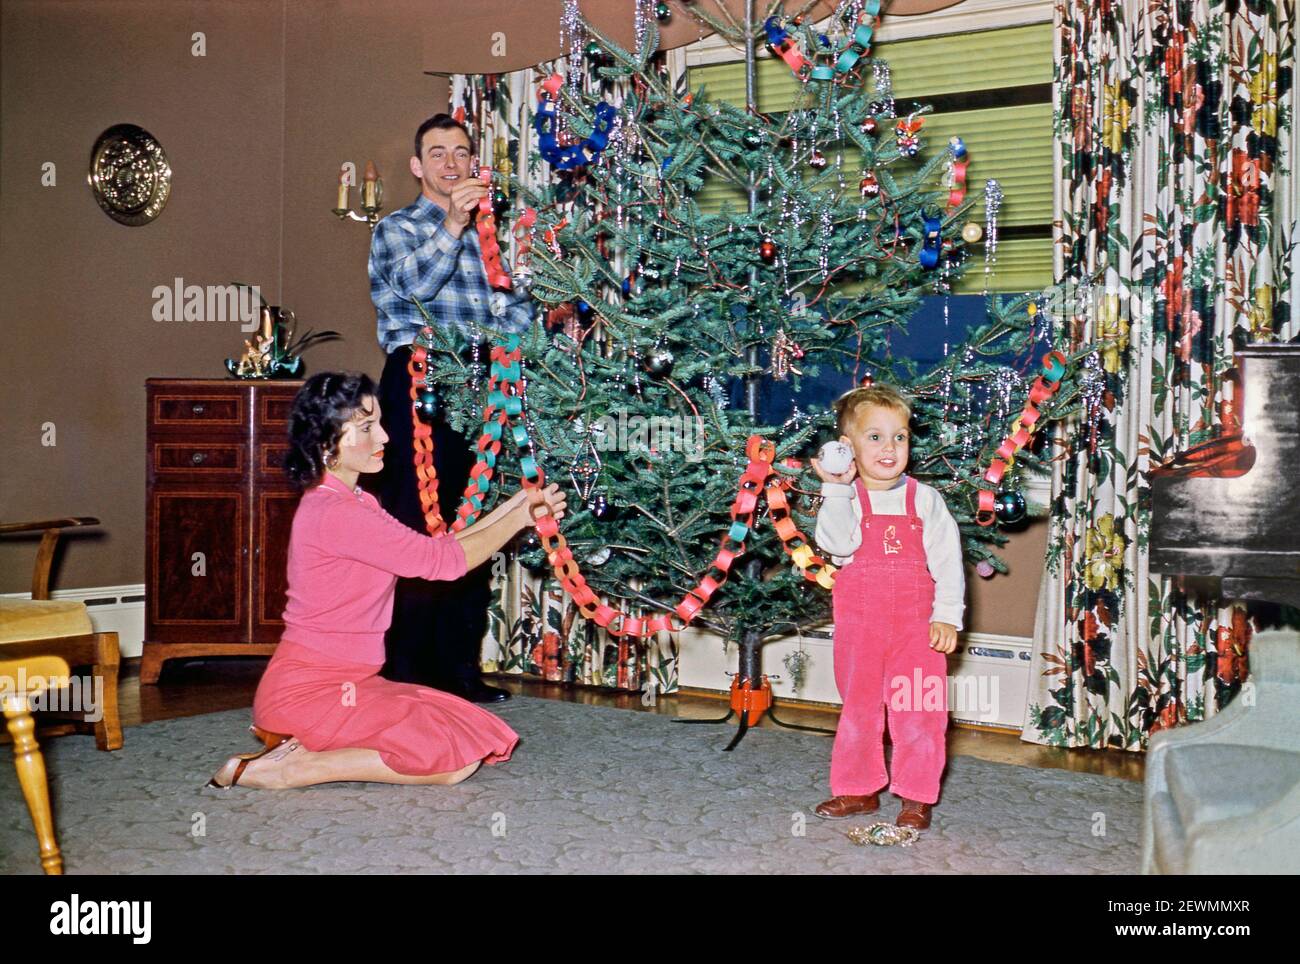 Putting Christmas decorations on the tree, in a living room in the USA in 1958. The traditional decorations for the large tree include tinsel, linked paper garlands and baubles, one of which the young boy is holding. This image is from an old American amateur Kodak colour transparency – a vintage 1950s photograph. Stock Photo